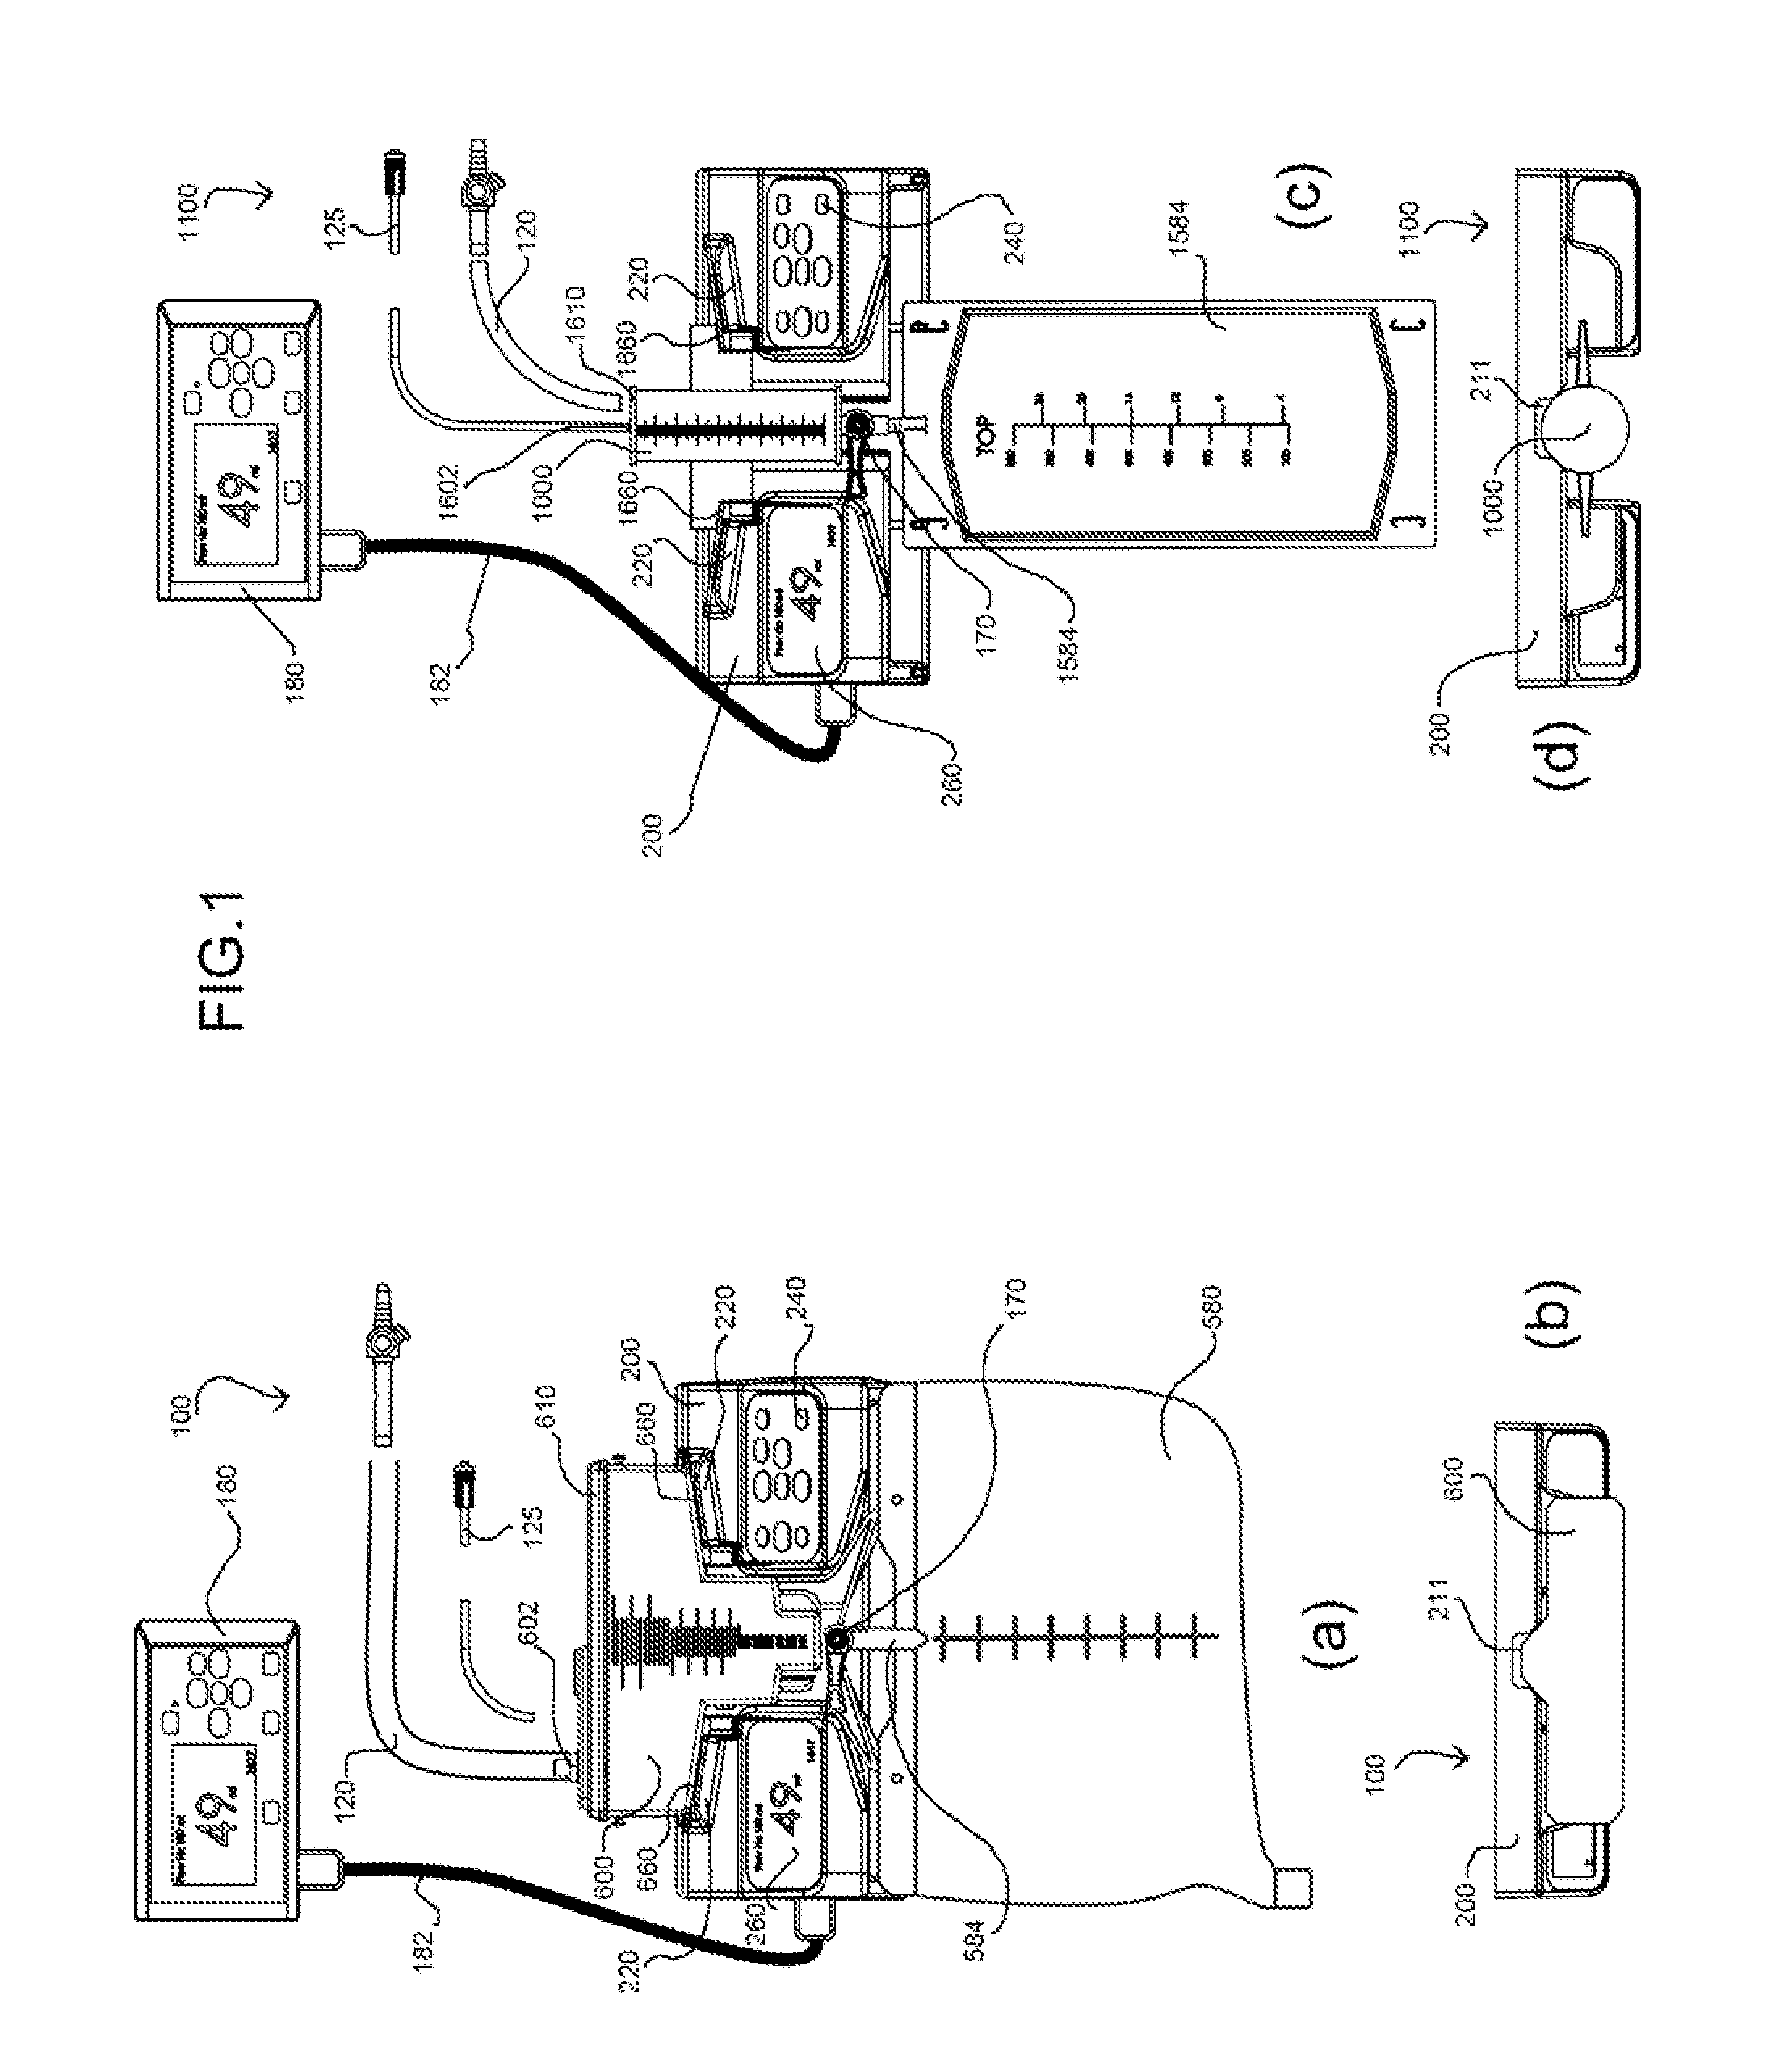 Apparatus and method for bedside collection of body fluids and automatic volume level monitoring